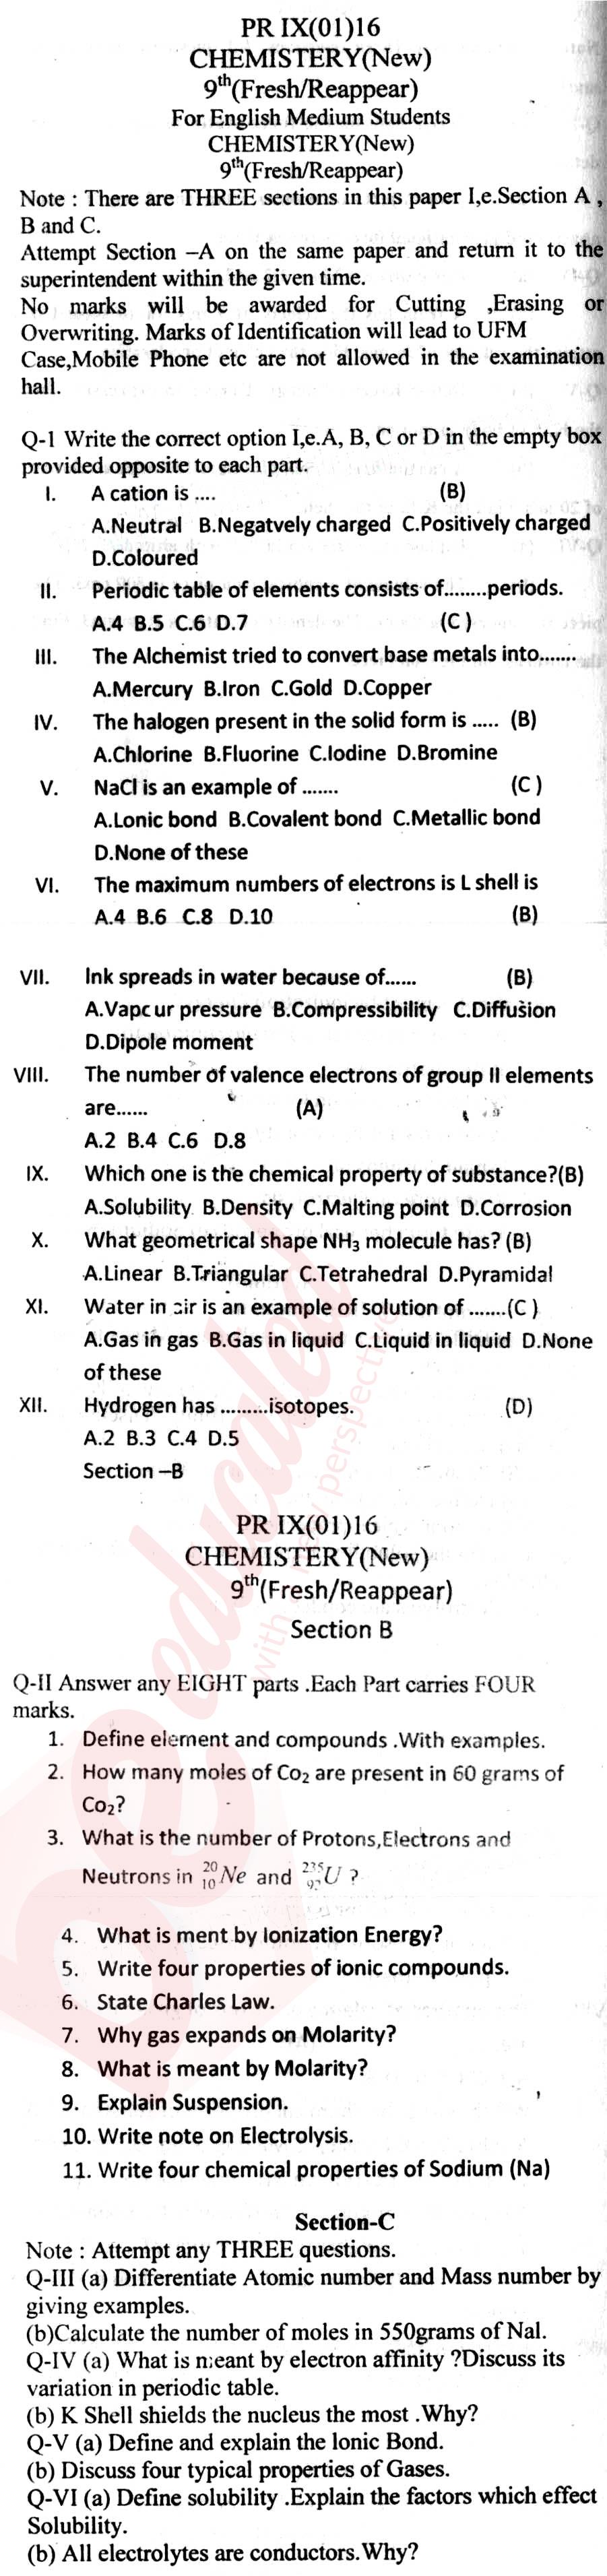 Chemistry 9th English Medium Past Paper Group 1 BISE Bannu 2016